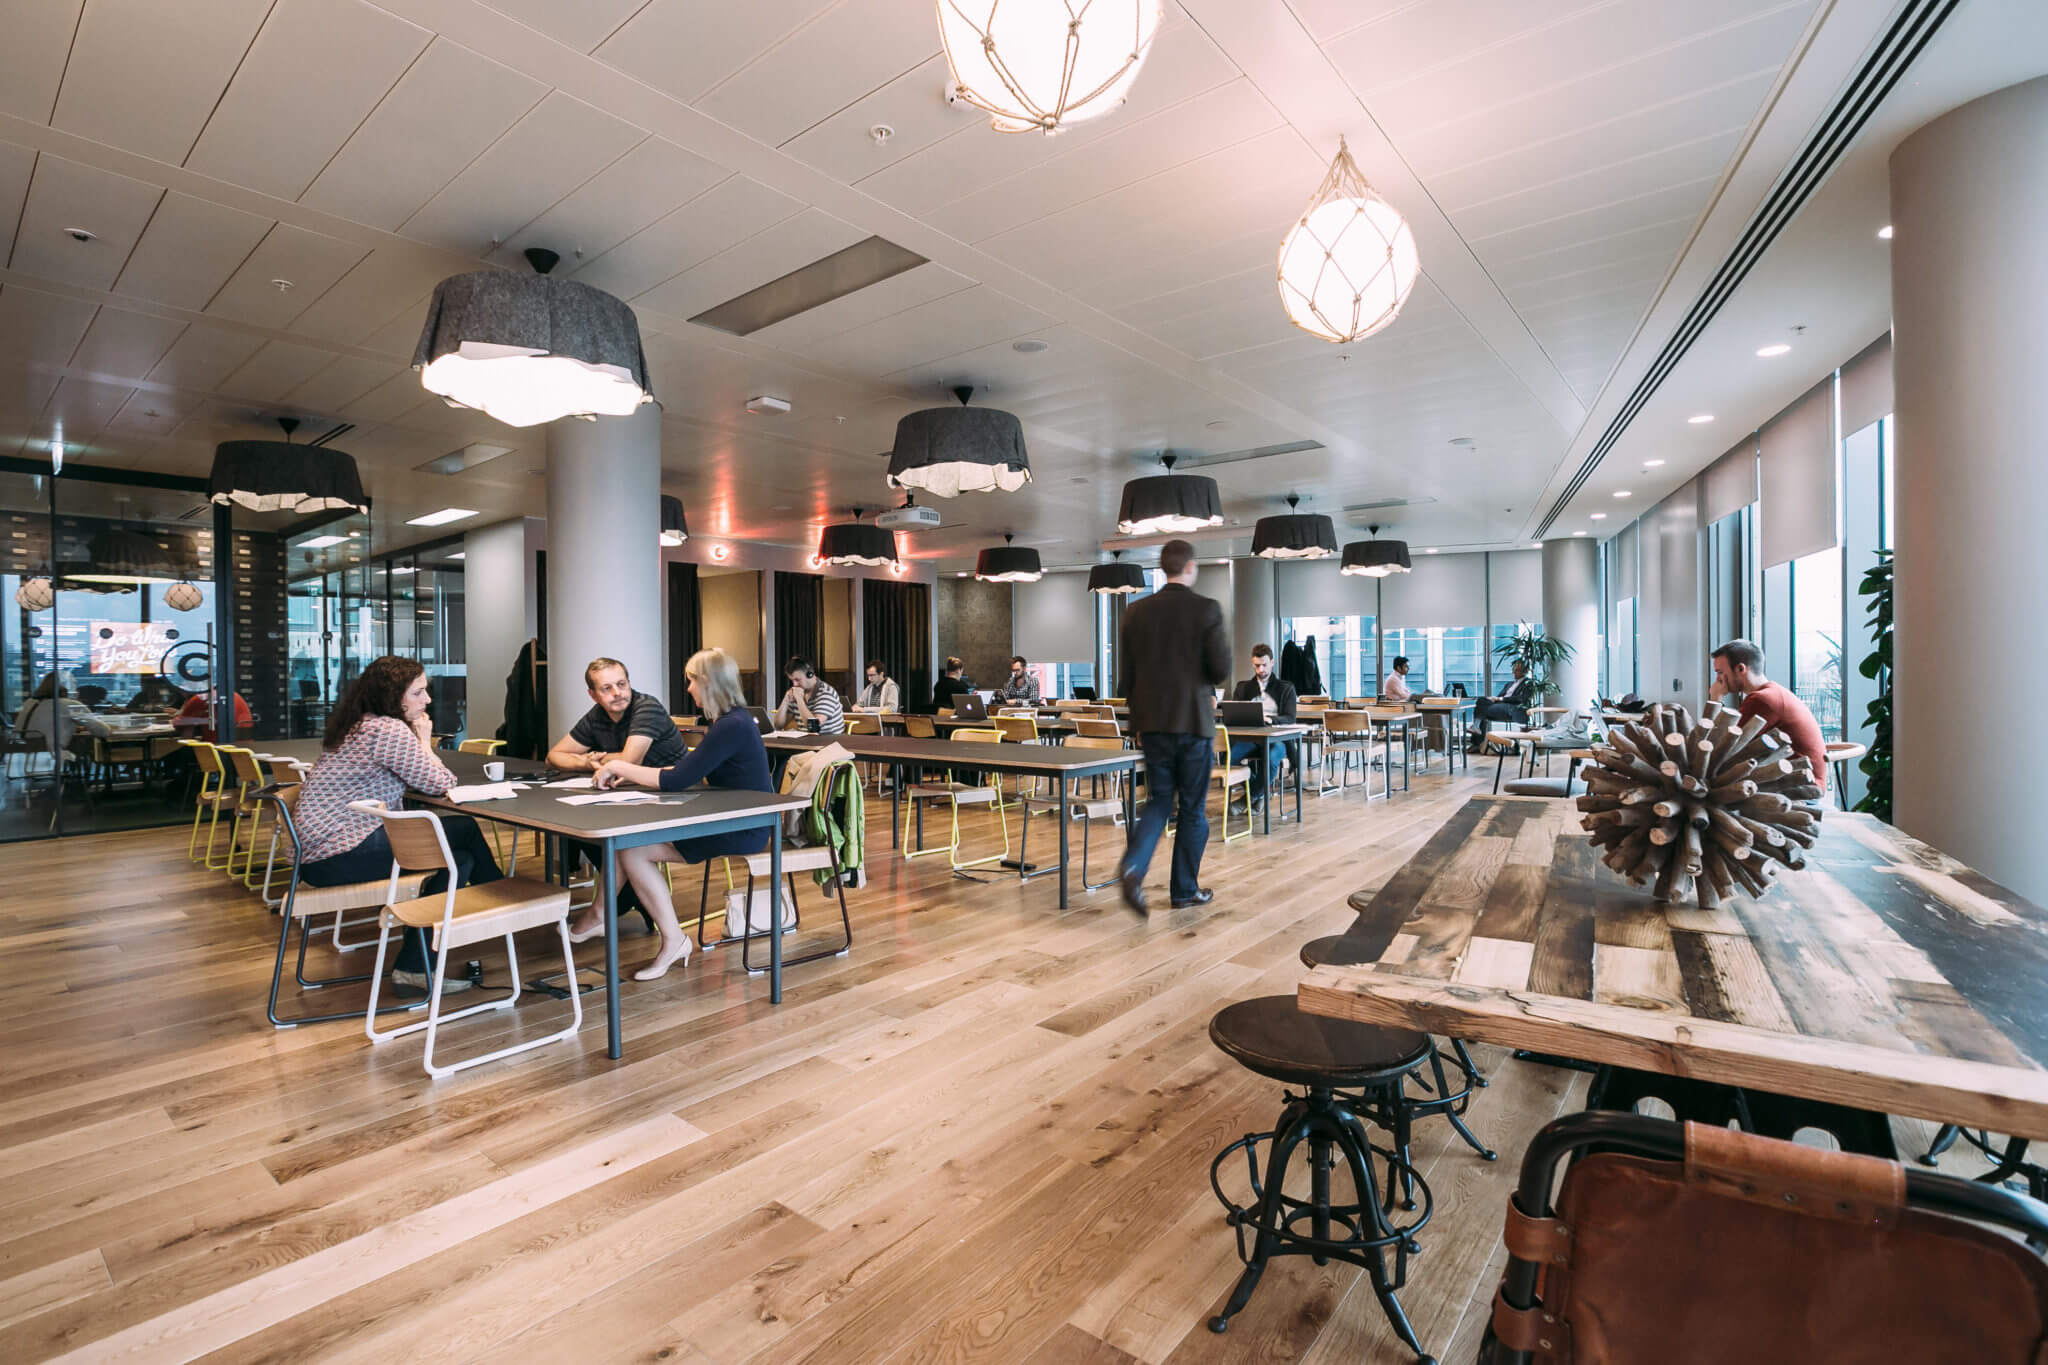 Hot-desking in London: 7 spots to get you started